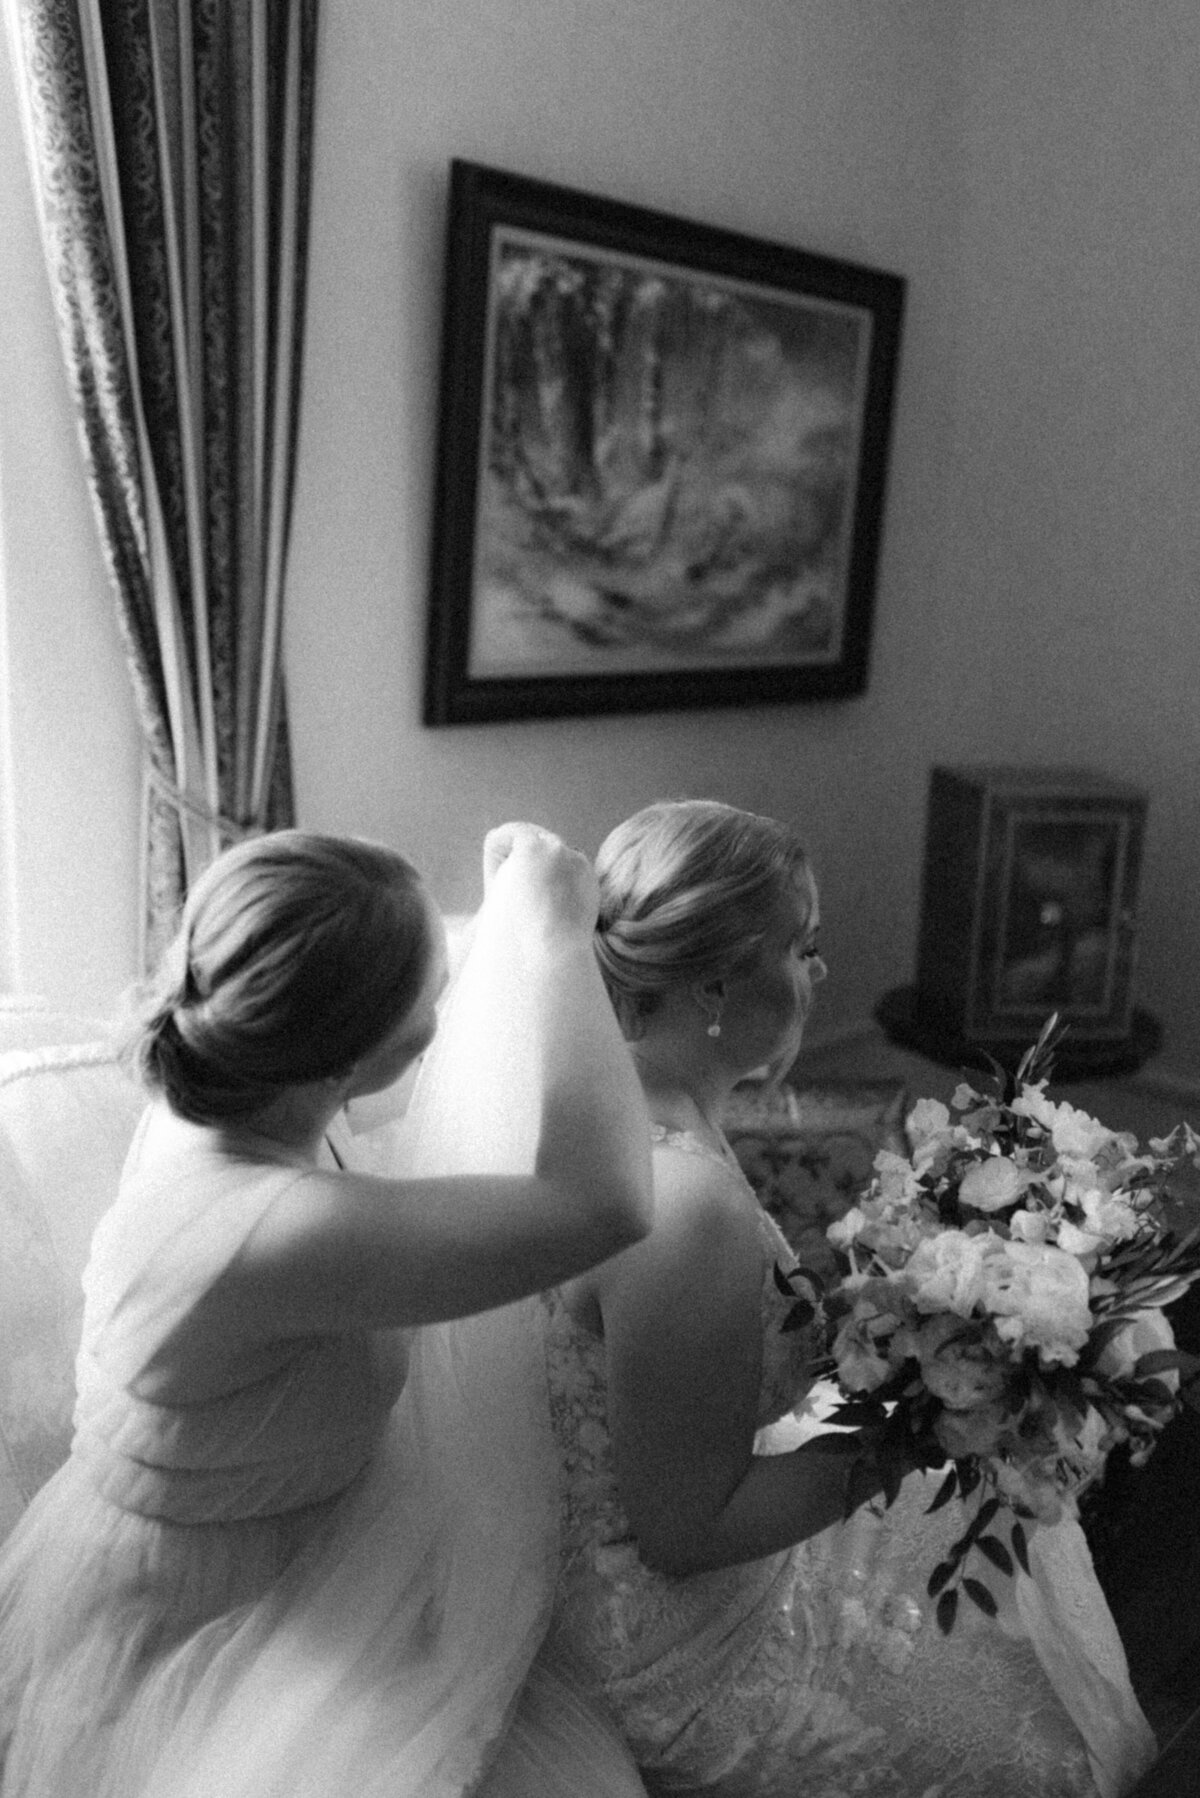 The bridesmaid helping in putting on the veil in an image photographed by wedding photographer Hannika Gabrielsson.